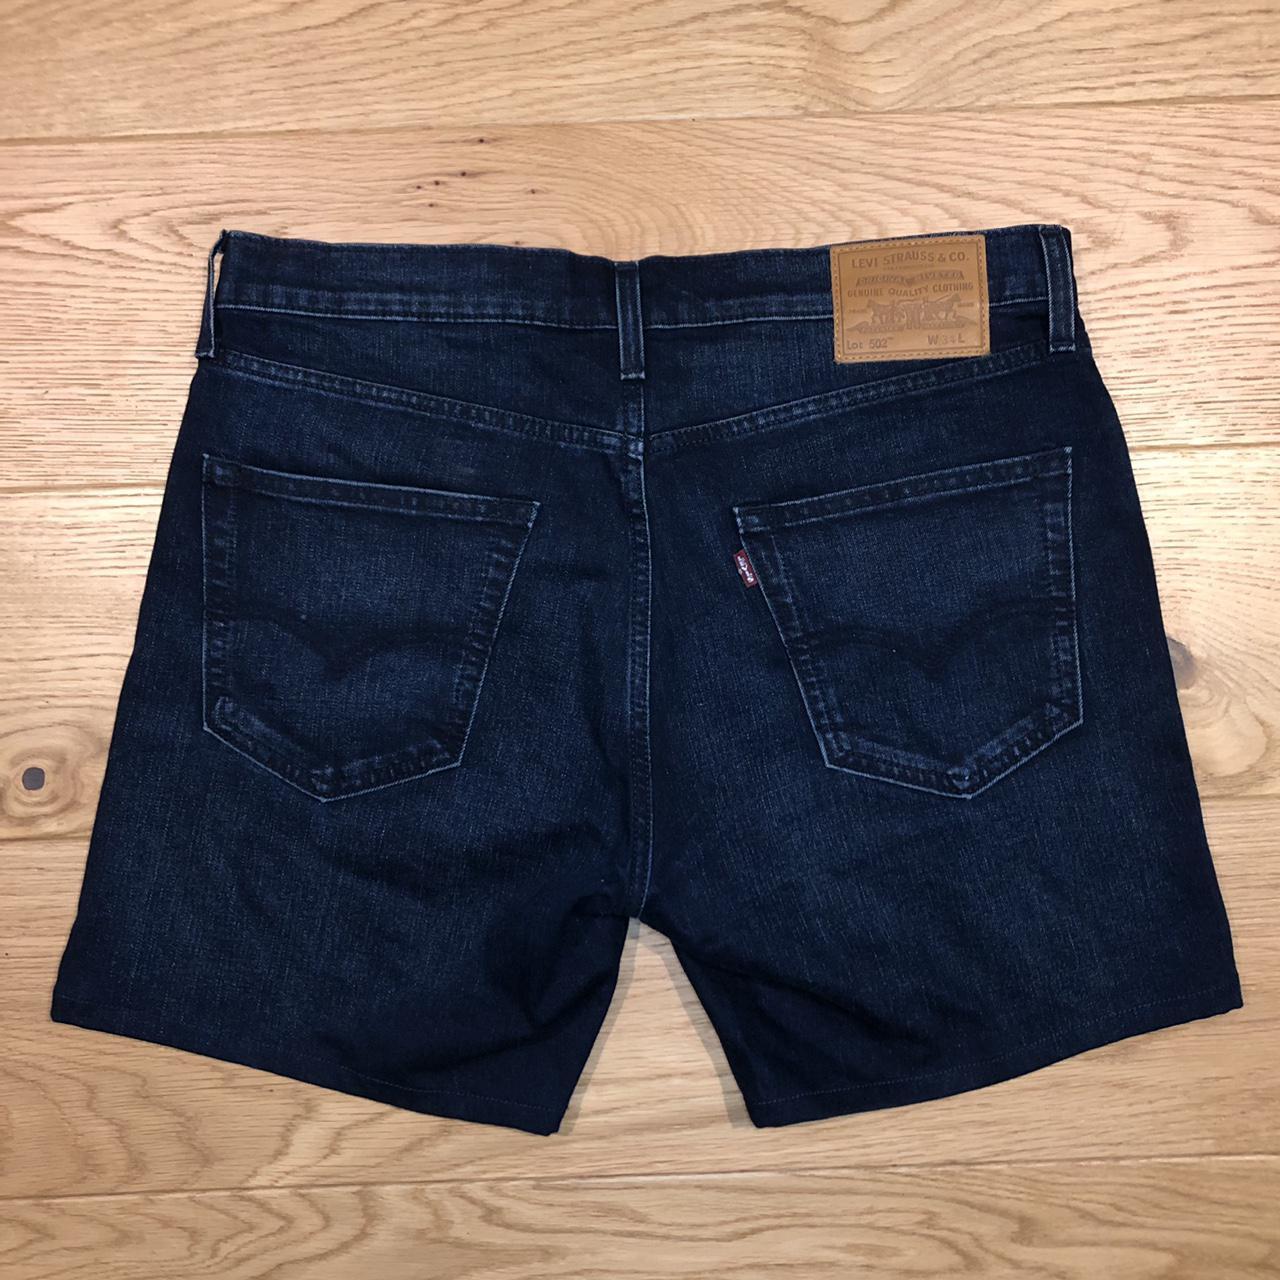 Levi's Men's Navy and Blue Shorts (3)